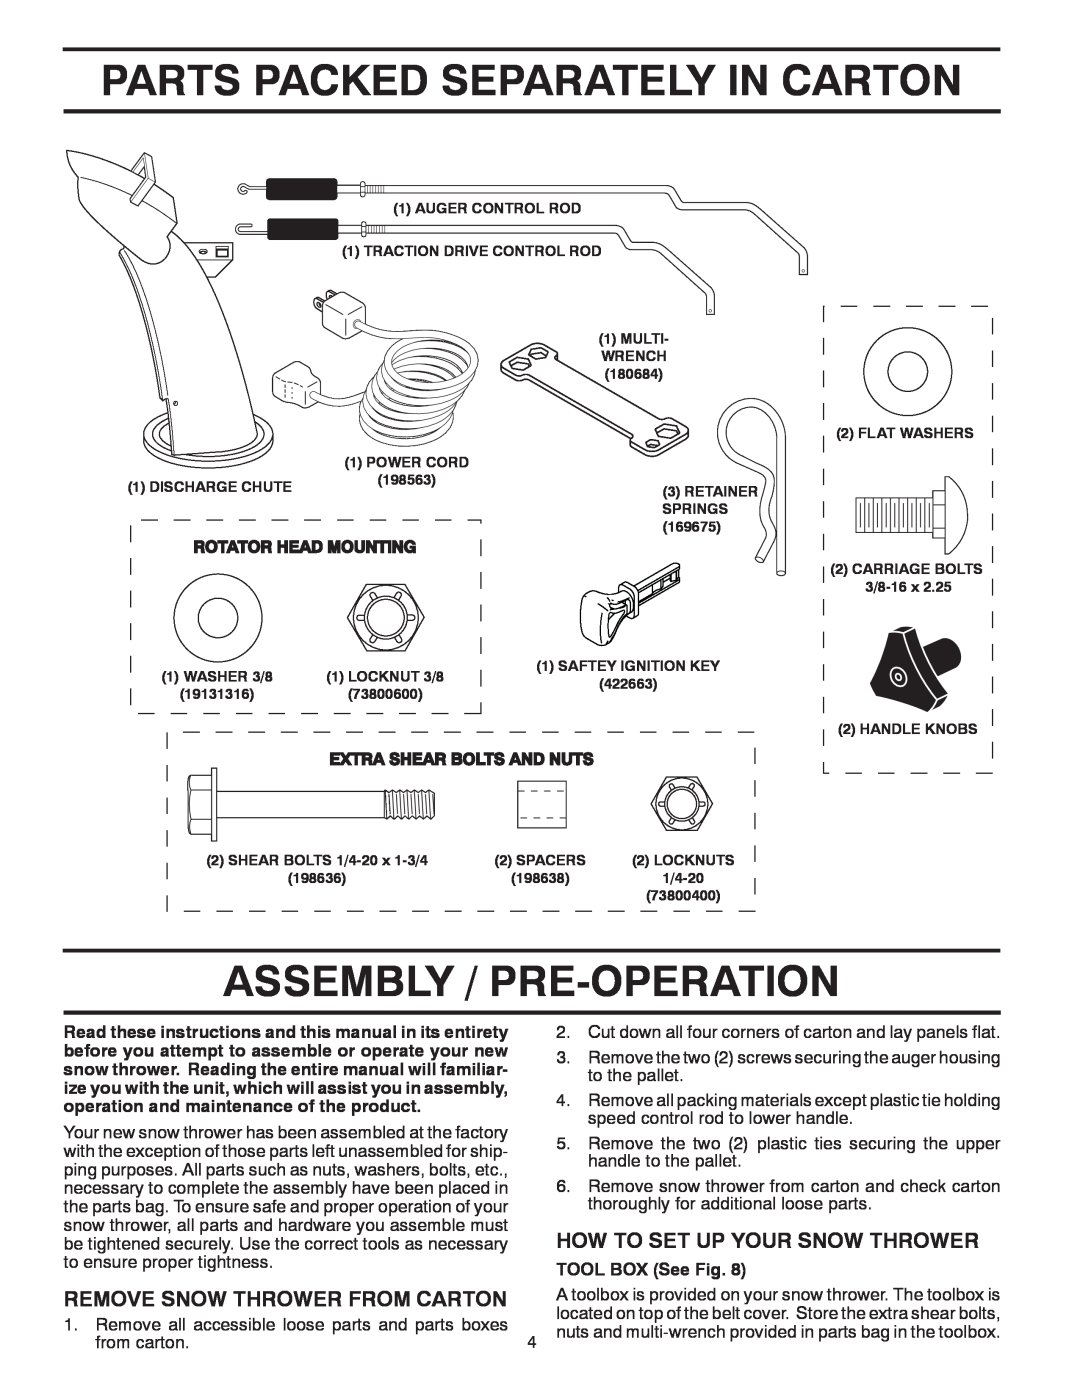 Poulan 424003 owner manual Parts Packed Separately In Carton, Assembly / Pre-Operation, How To Set Up Your Snow Thrower 